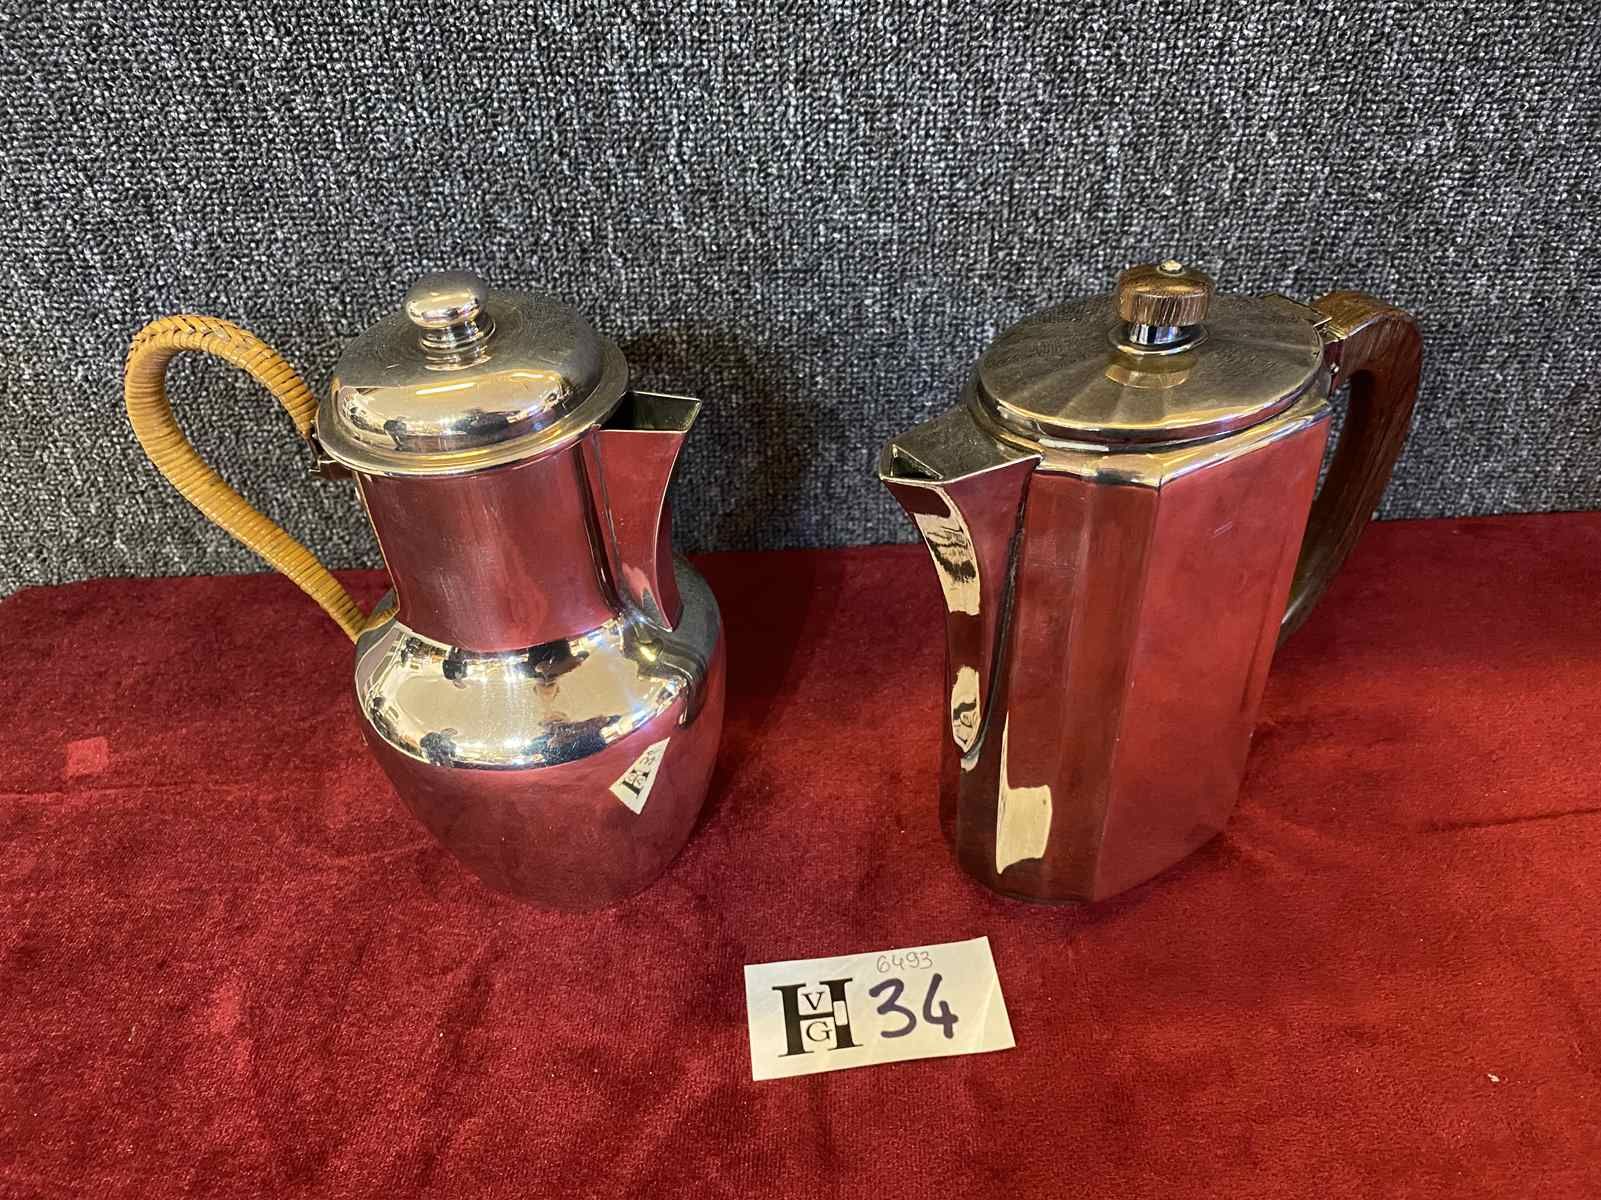 Mise à prix 20 € 
2 Jugs, one art deco and one XIXth with the wicker handle